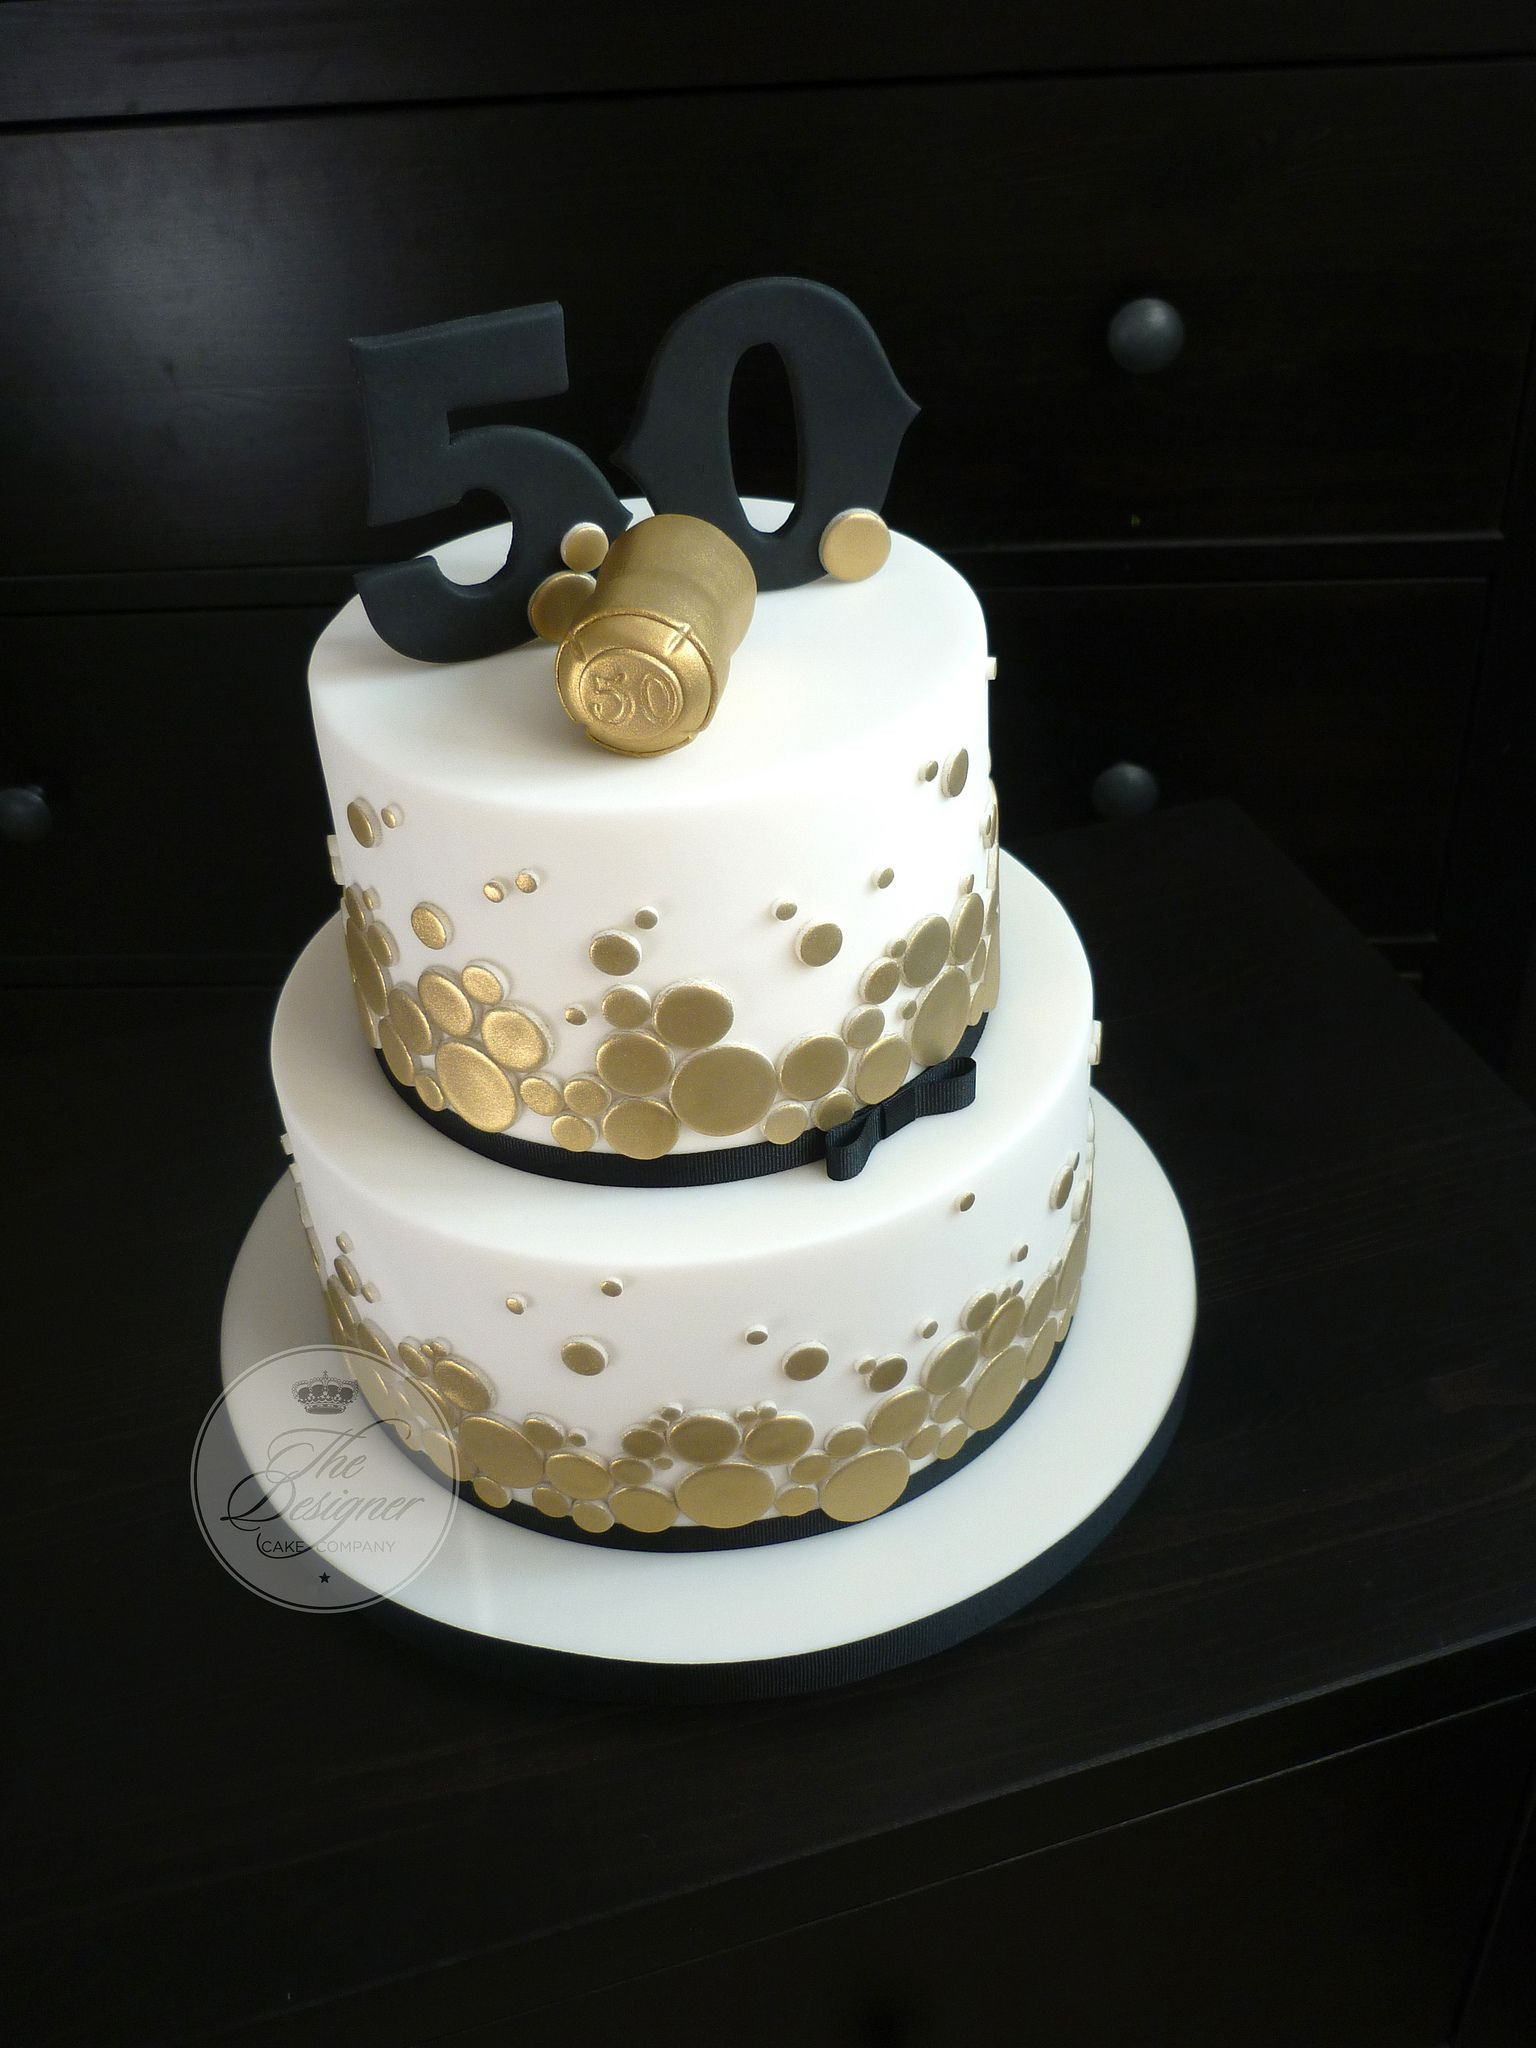 50th Birthday Cake Ideas For Him
 Champagne themed 50th birthday cake